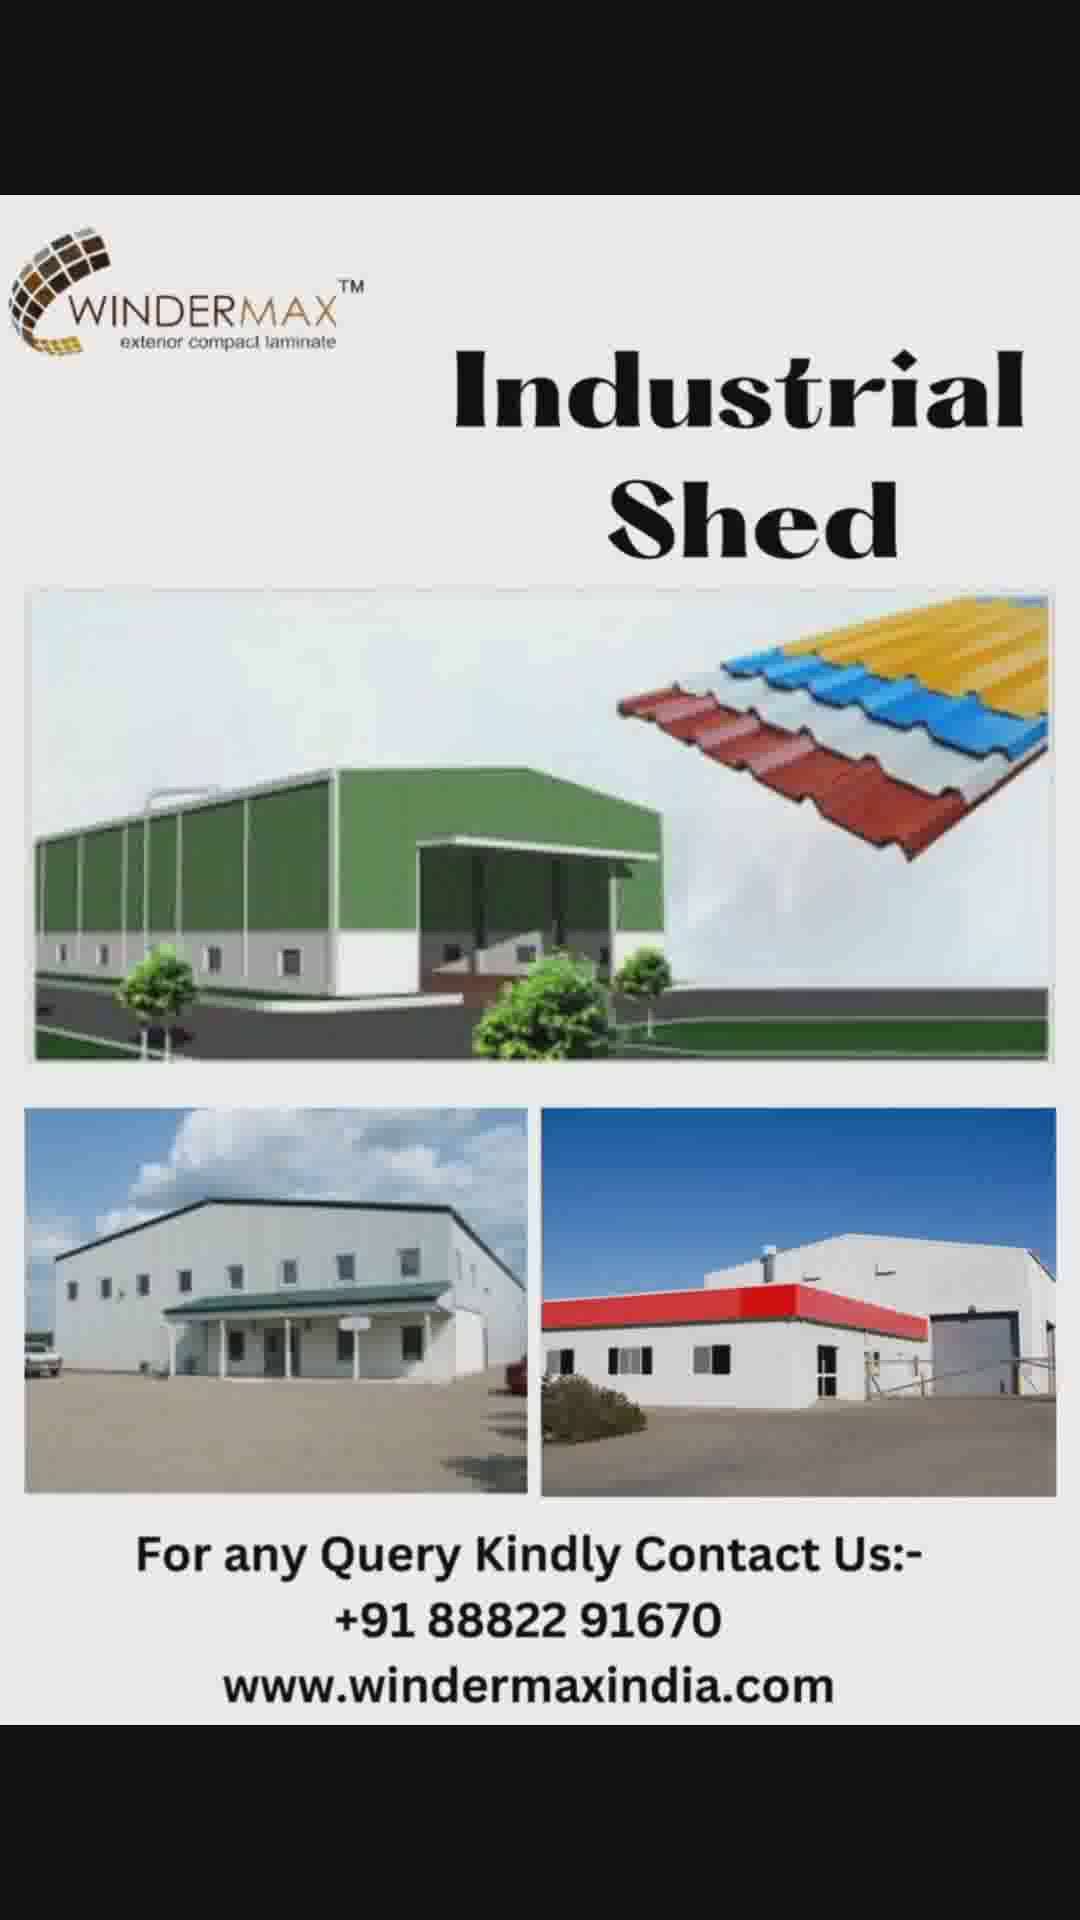 Windermax India Industrial Shed Fabrication.
.
.
#shedfabrication #shed #construction #architecture  #msfabrication #elevation #modernexterior #factory  #aluminiumfin #Factoryshed #industries #industry #industrialshed #homedecor  #elevationdesign #architect  #exteriordesign #architecturedesign #civilengineering  #interiordesigner #elevations  #frontelevation #architecturelovers #home #facade #shed #shedfabrication #industrial #warehouse #factory
.
.
For more details our all products please visit websites
www.windermaxindia.com
www.indianmake.co.in 
Info@windermaxindia.com
or call us on 
8882291670 9810980278

Regards
Windermax India